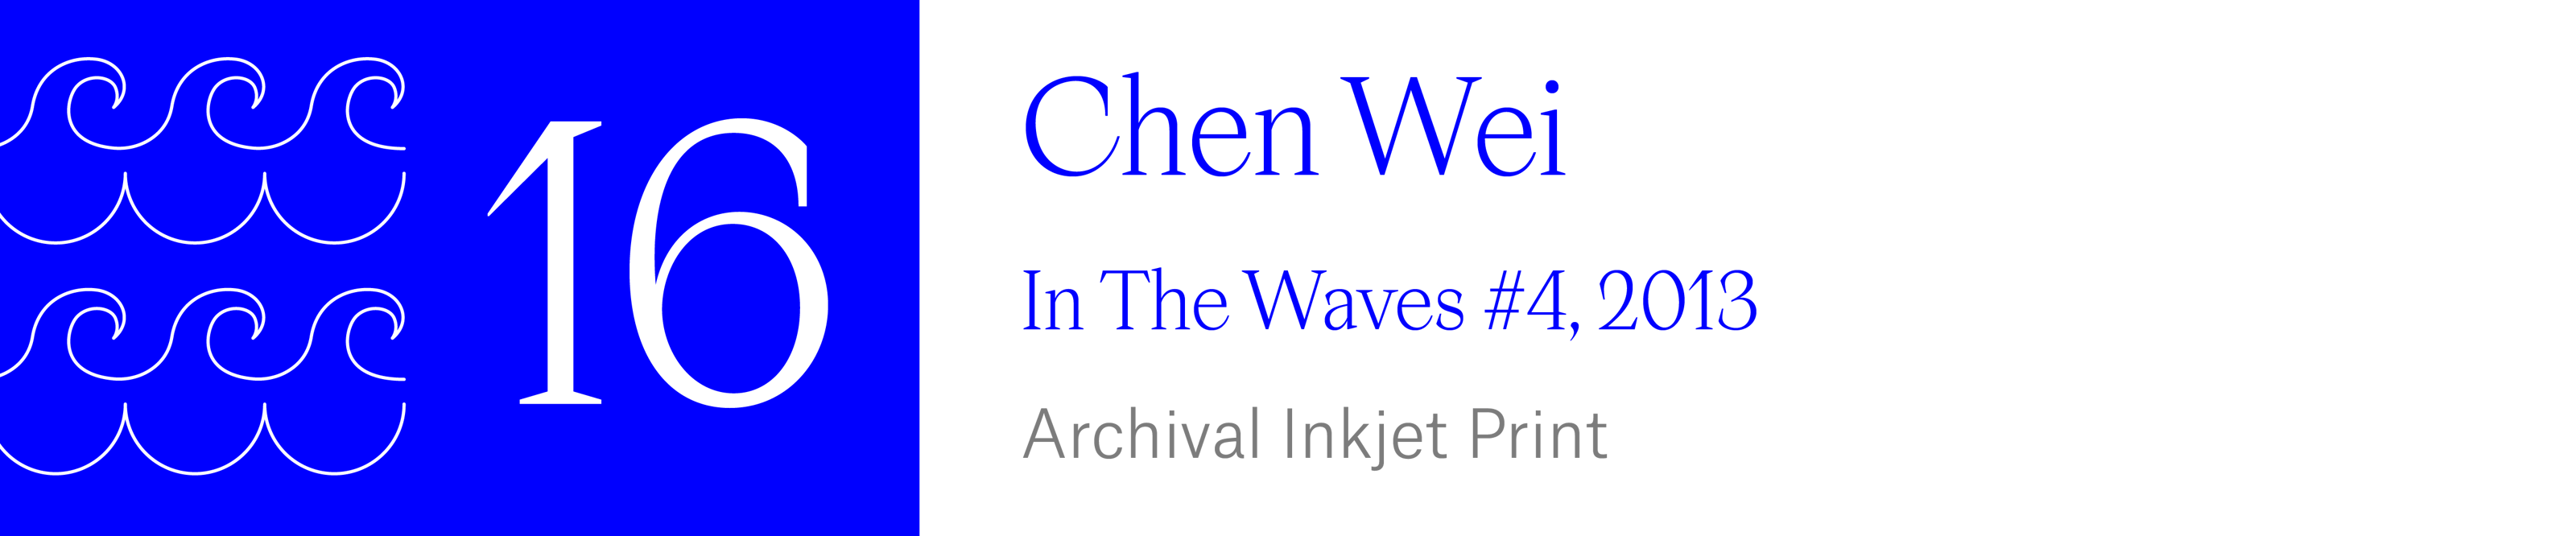 The Wave (16) Chen Wei - In The Waves #4, 2013. Archival Inkjet Print.